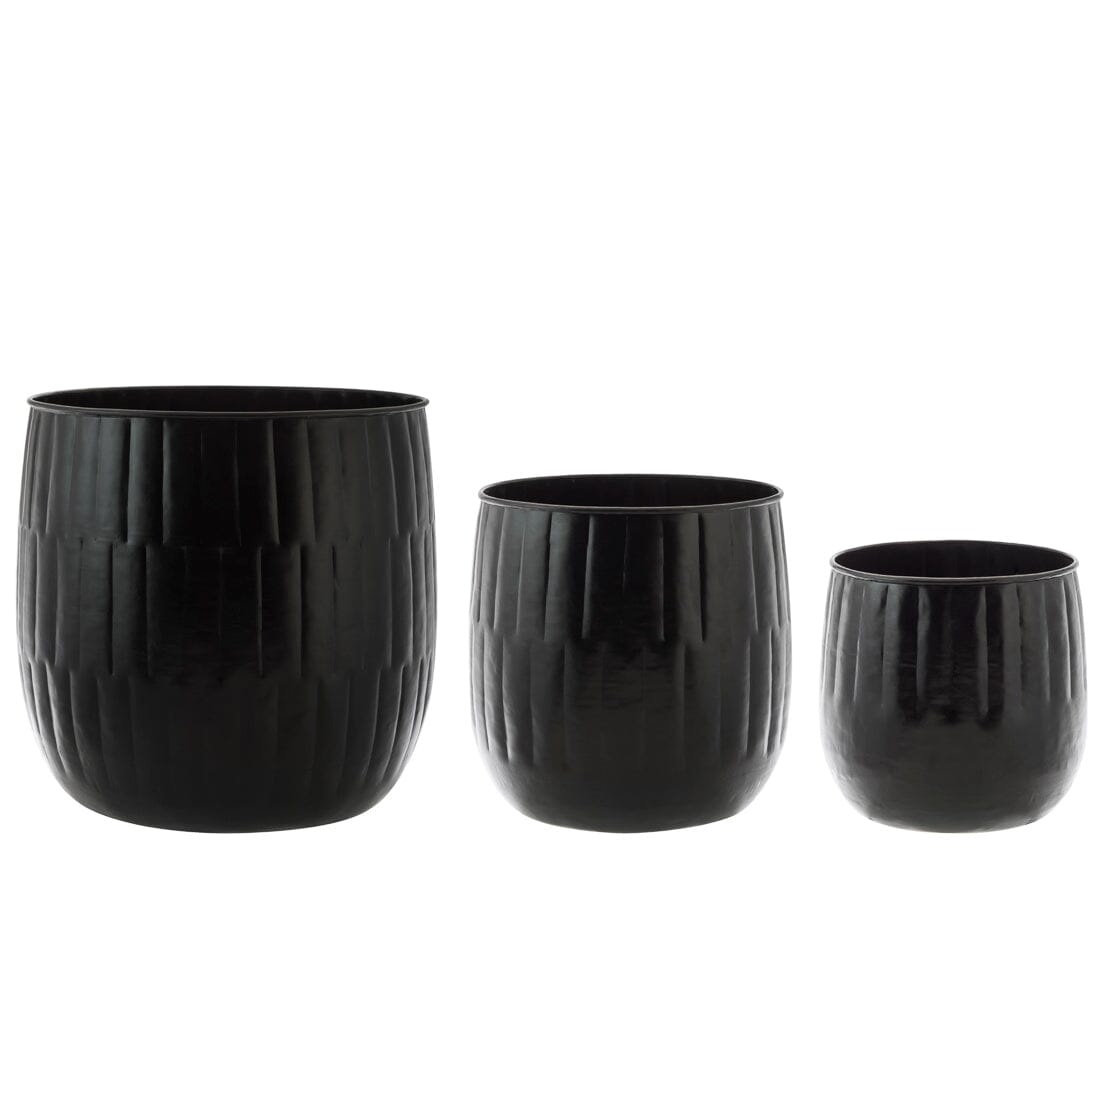 Metal Pots Set of 3 - Black All Products vendor-unknown Small 